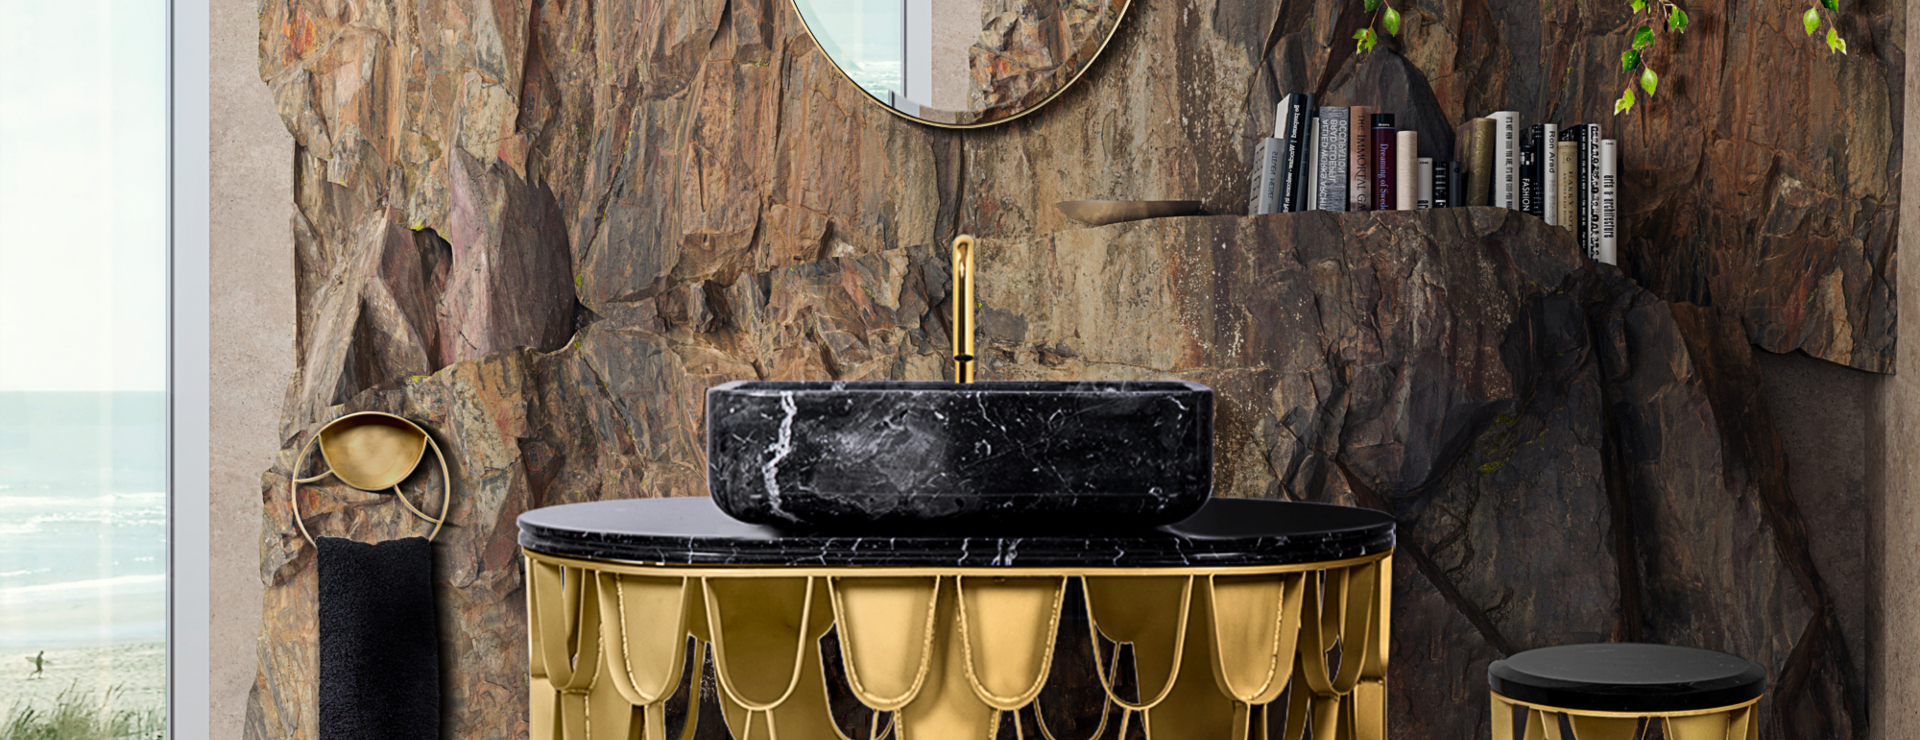 Get Inspired: How To Give A Little Luxury To Your Bathroom (Part VII)